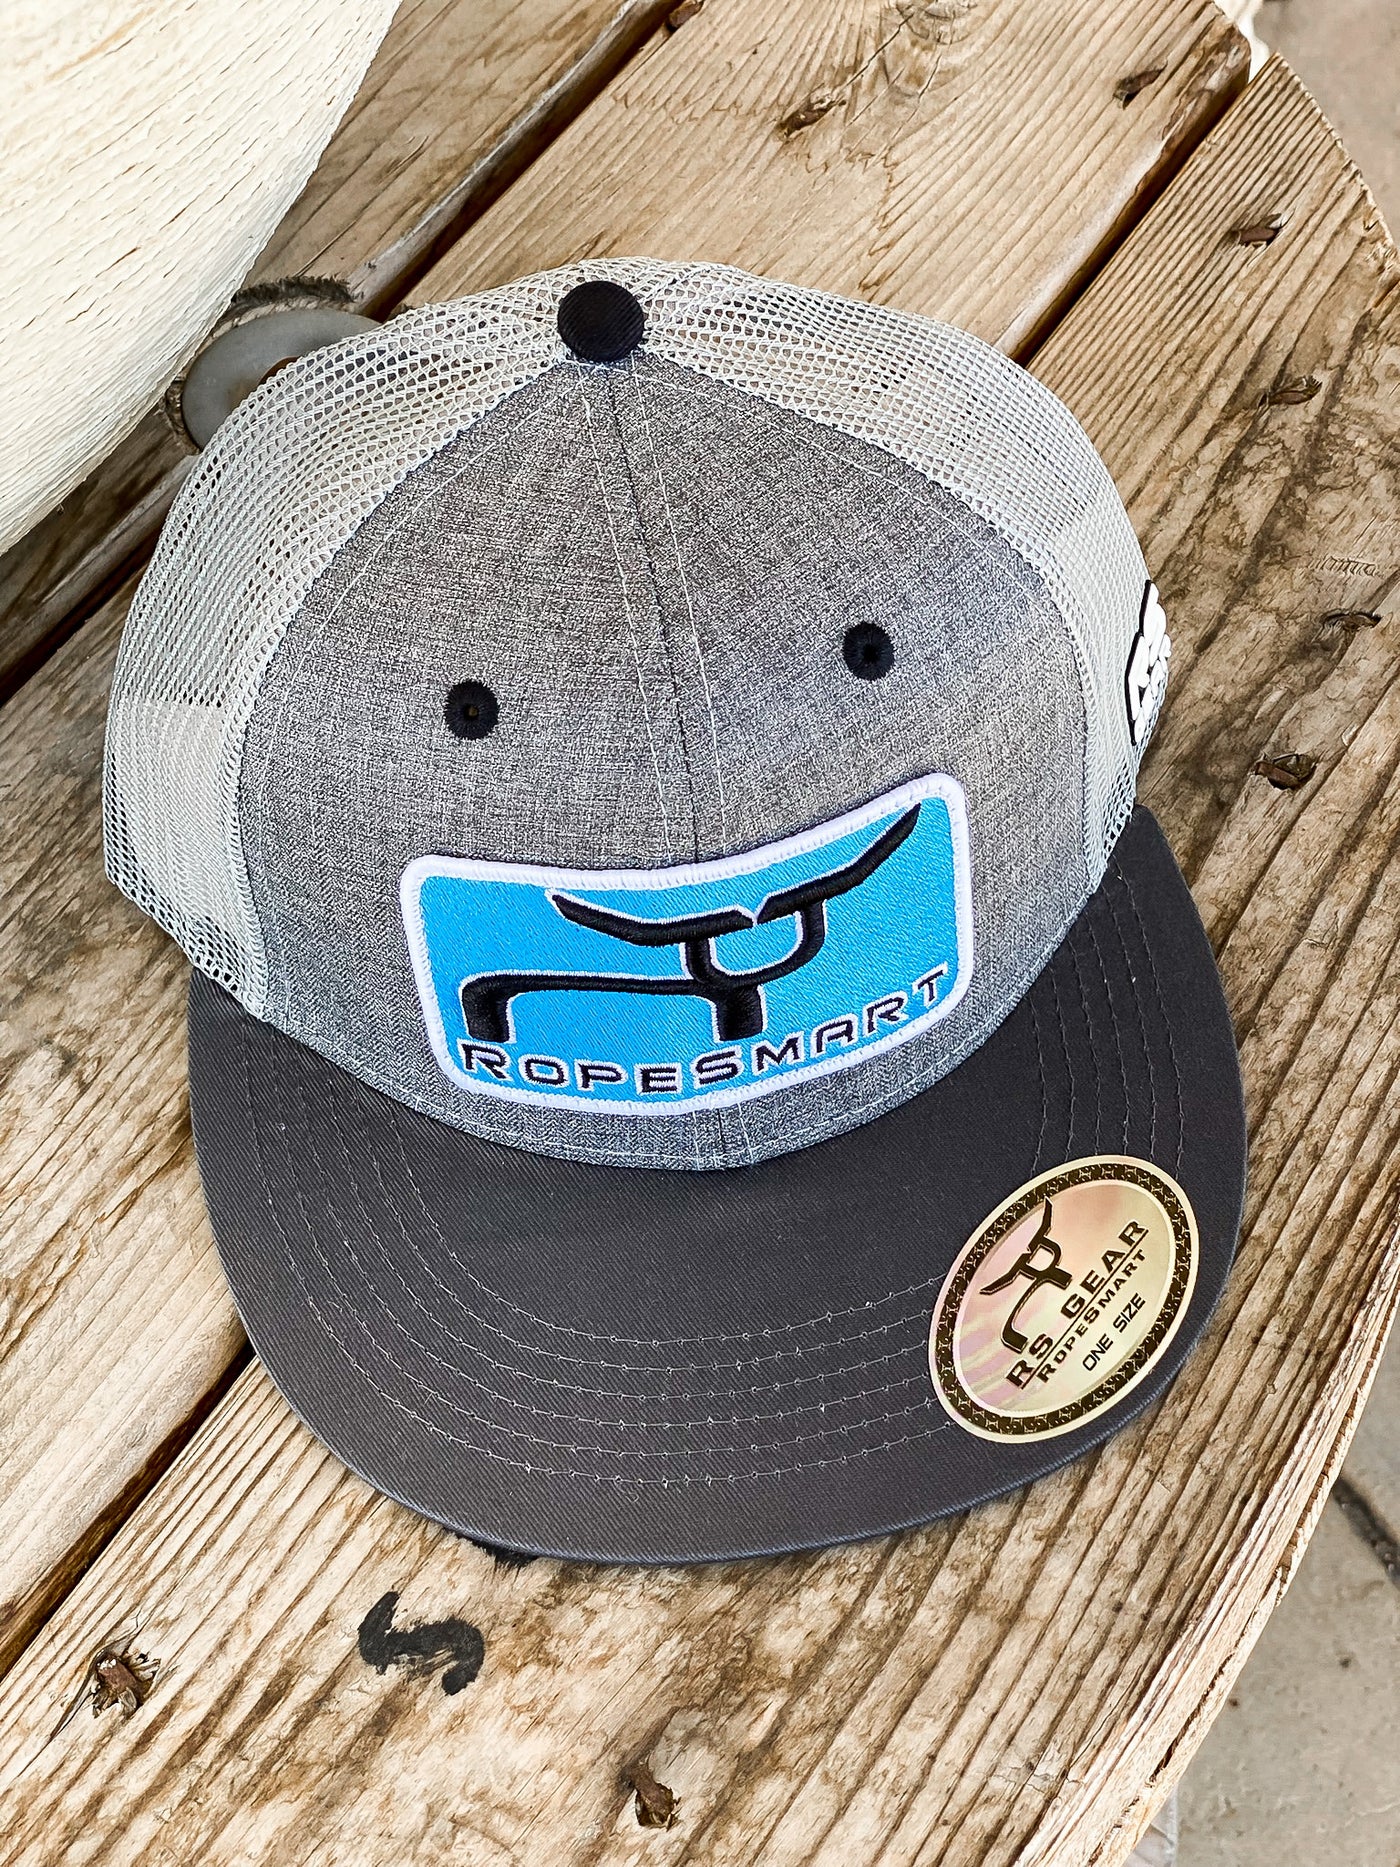 Ropesmart Heather Grey Bill/Teal Patch